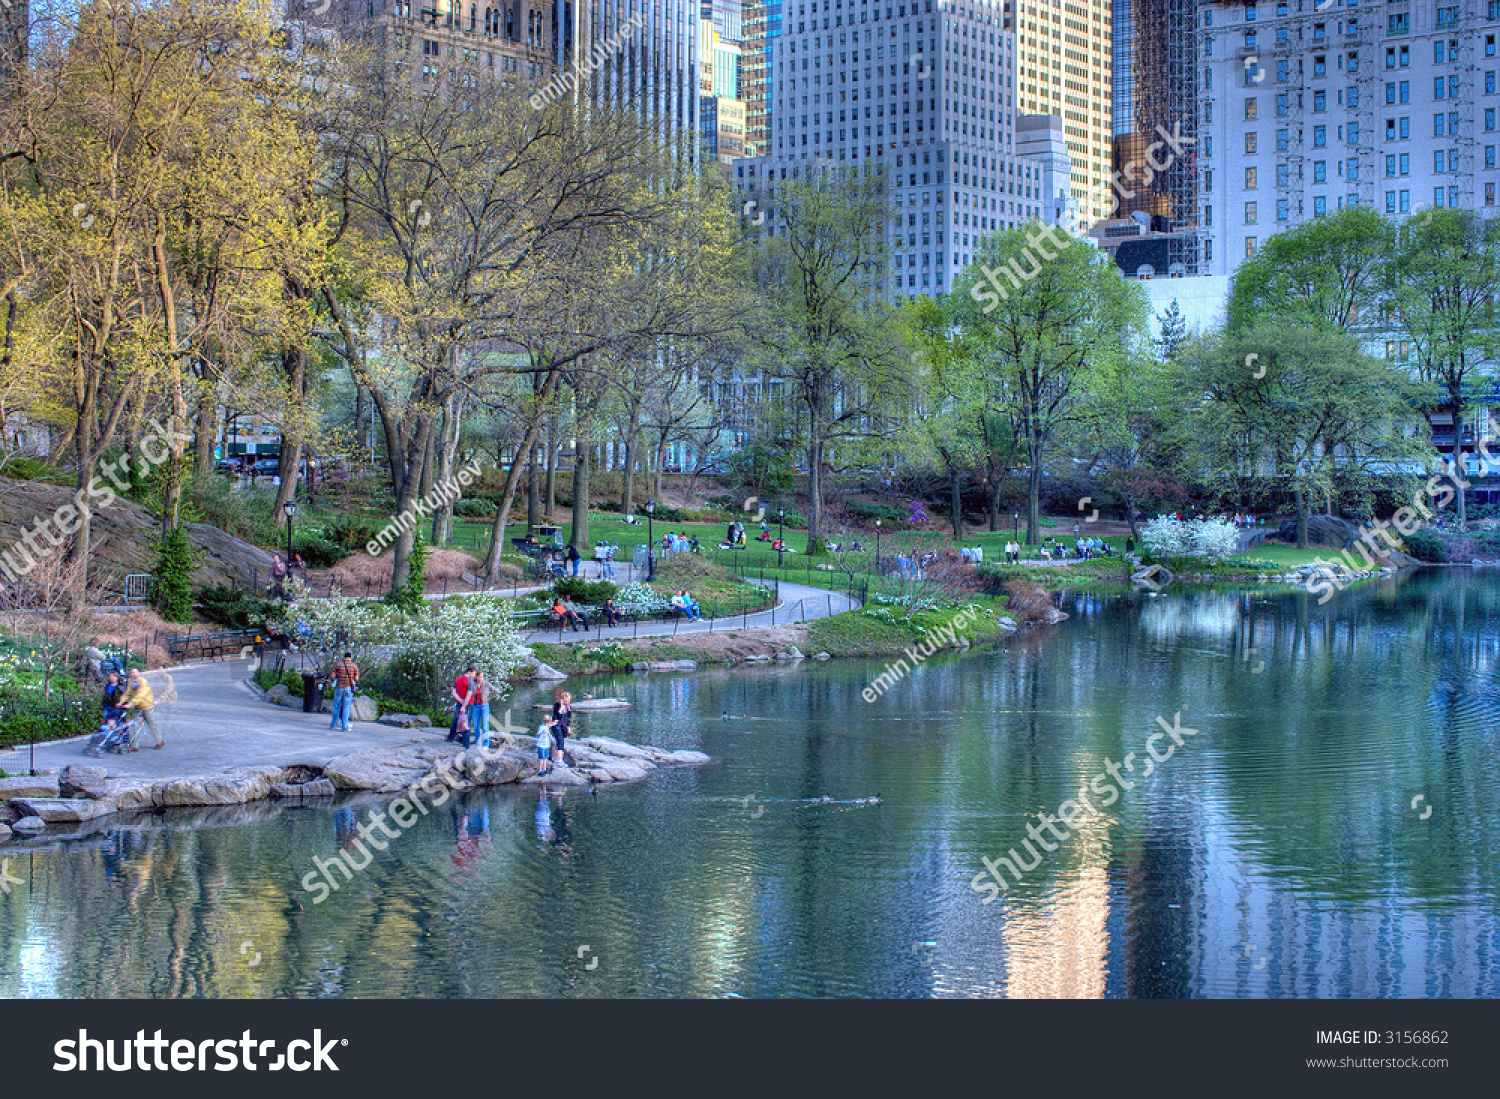 Pond In Central Park, New York City,Manhattan,United States Of America ...